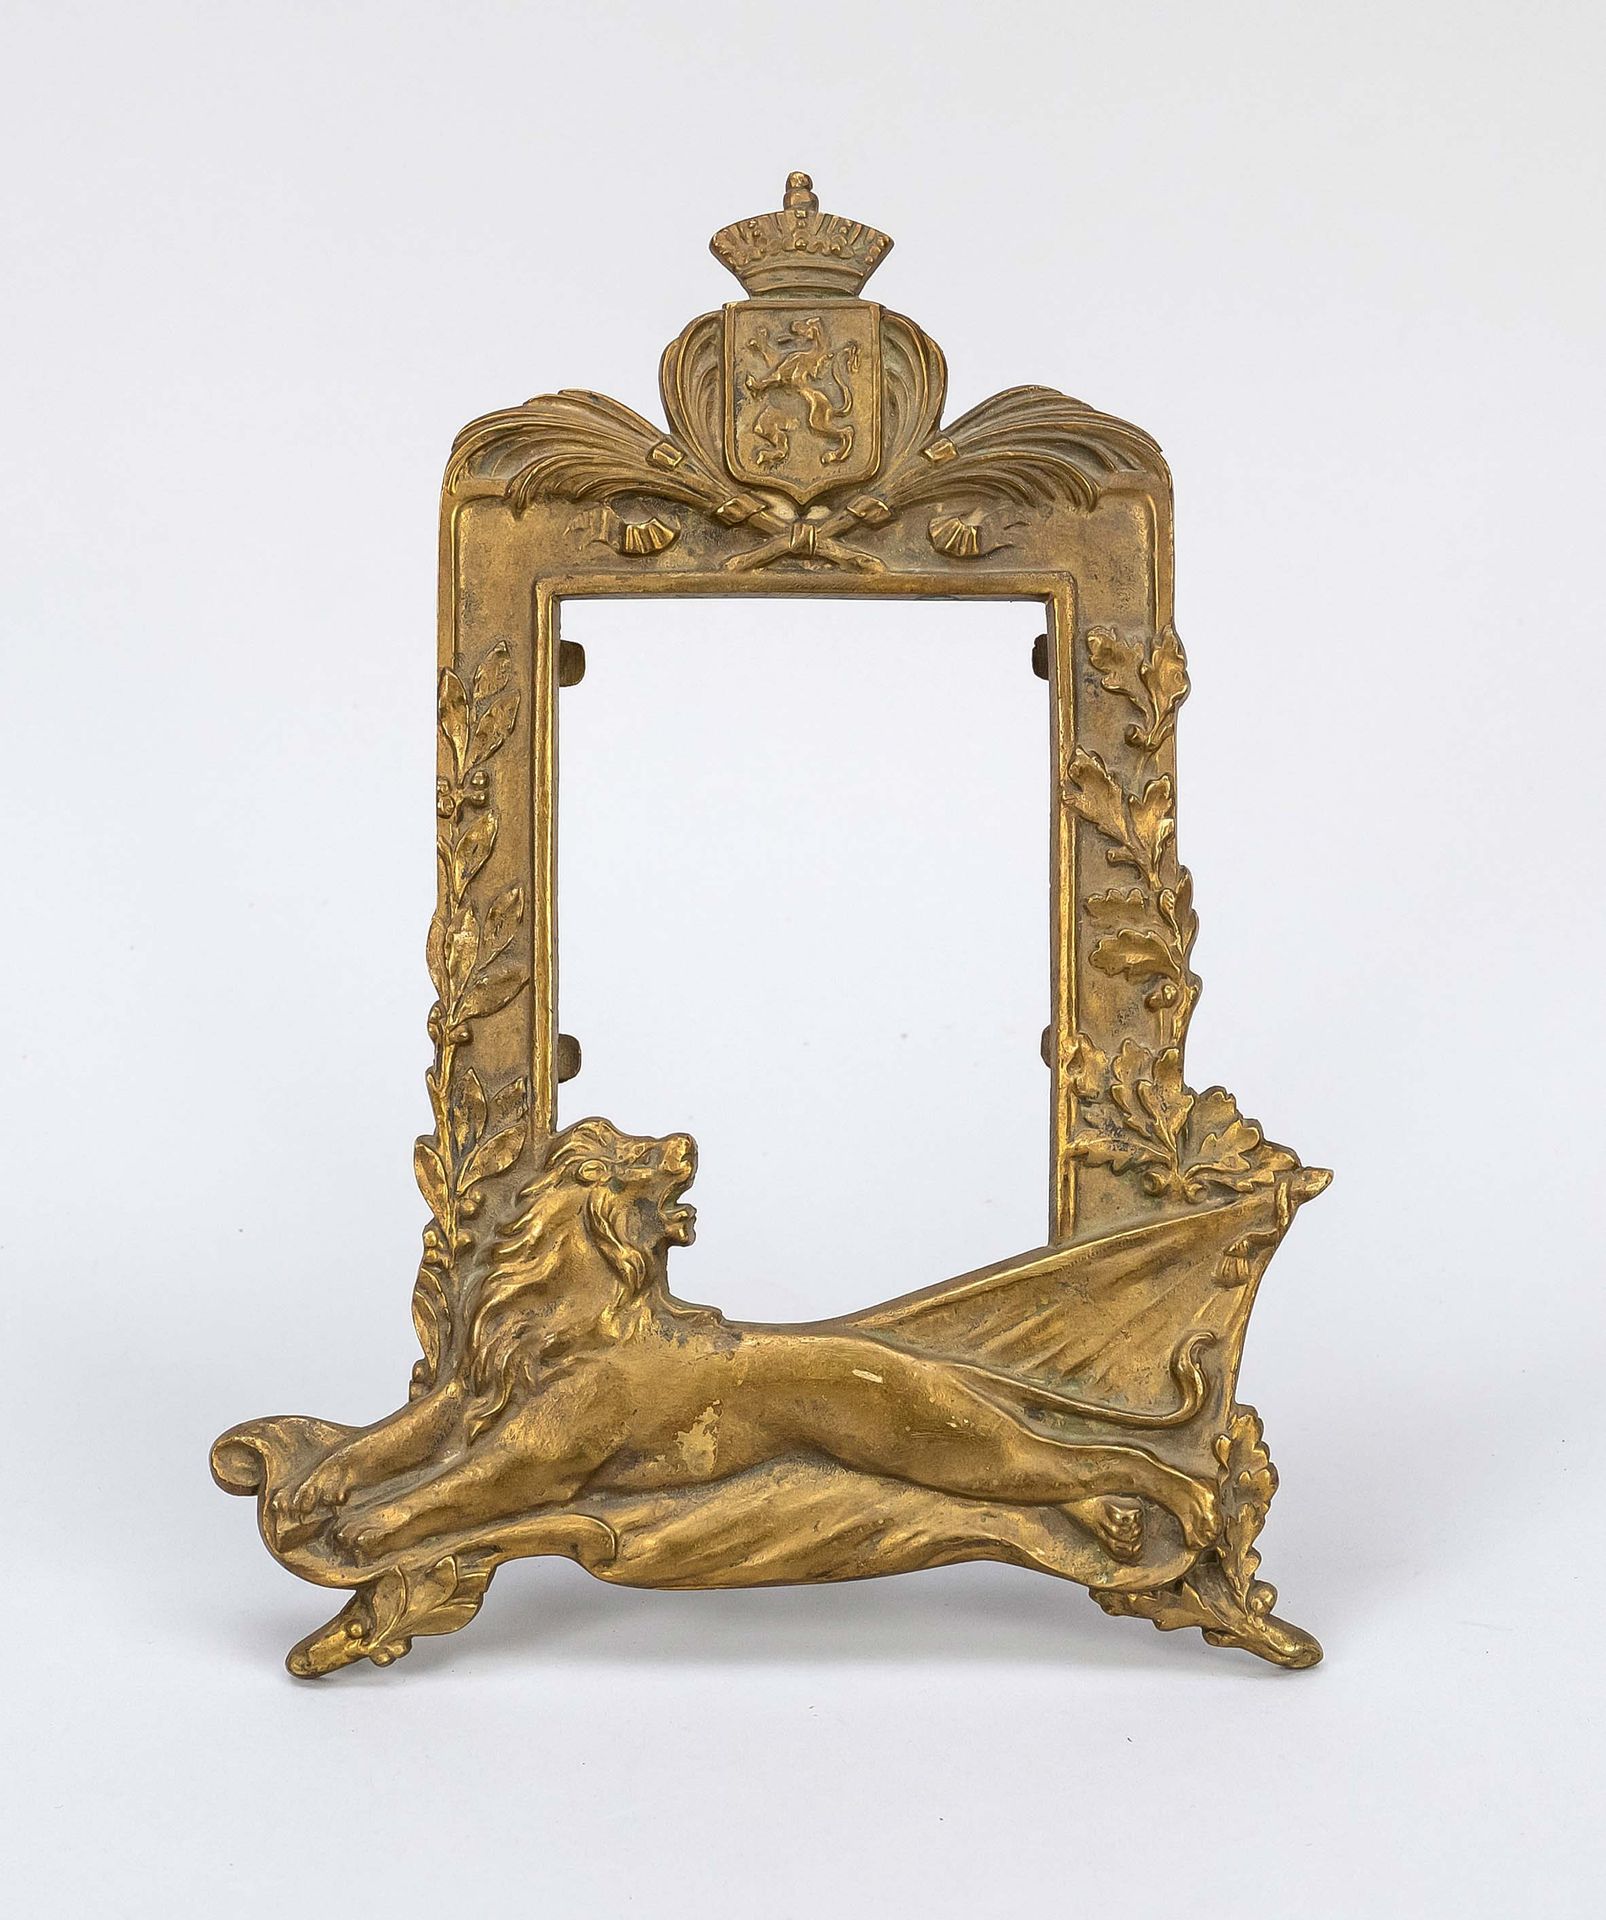 Null Table picture frame, Historicism, end of the 19th century, on the lower hal&hellip;